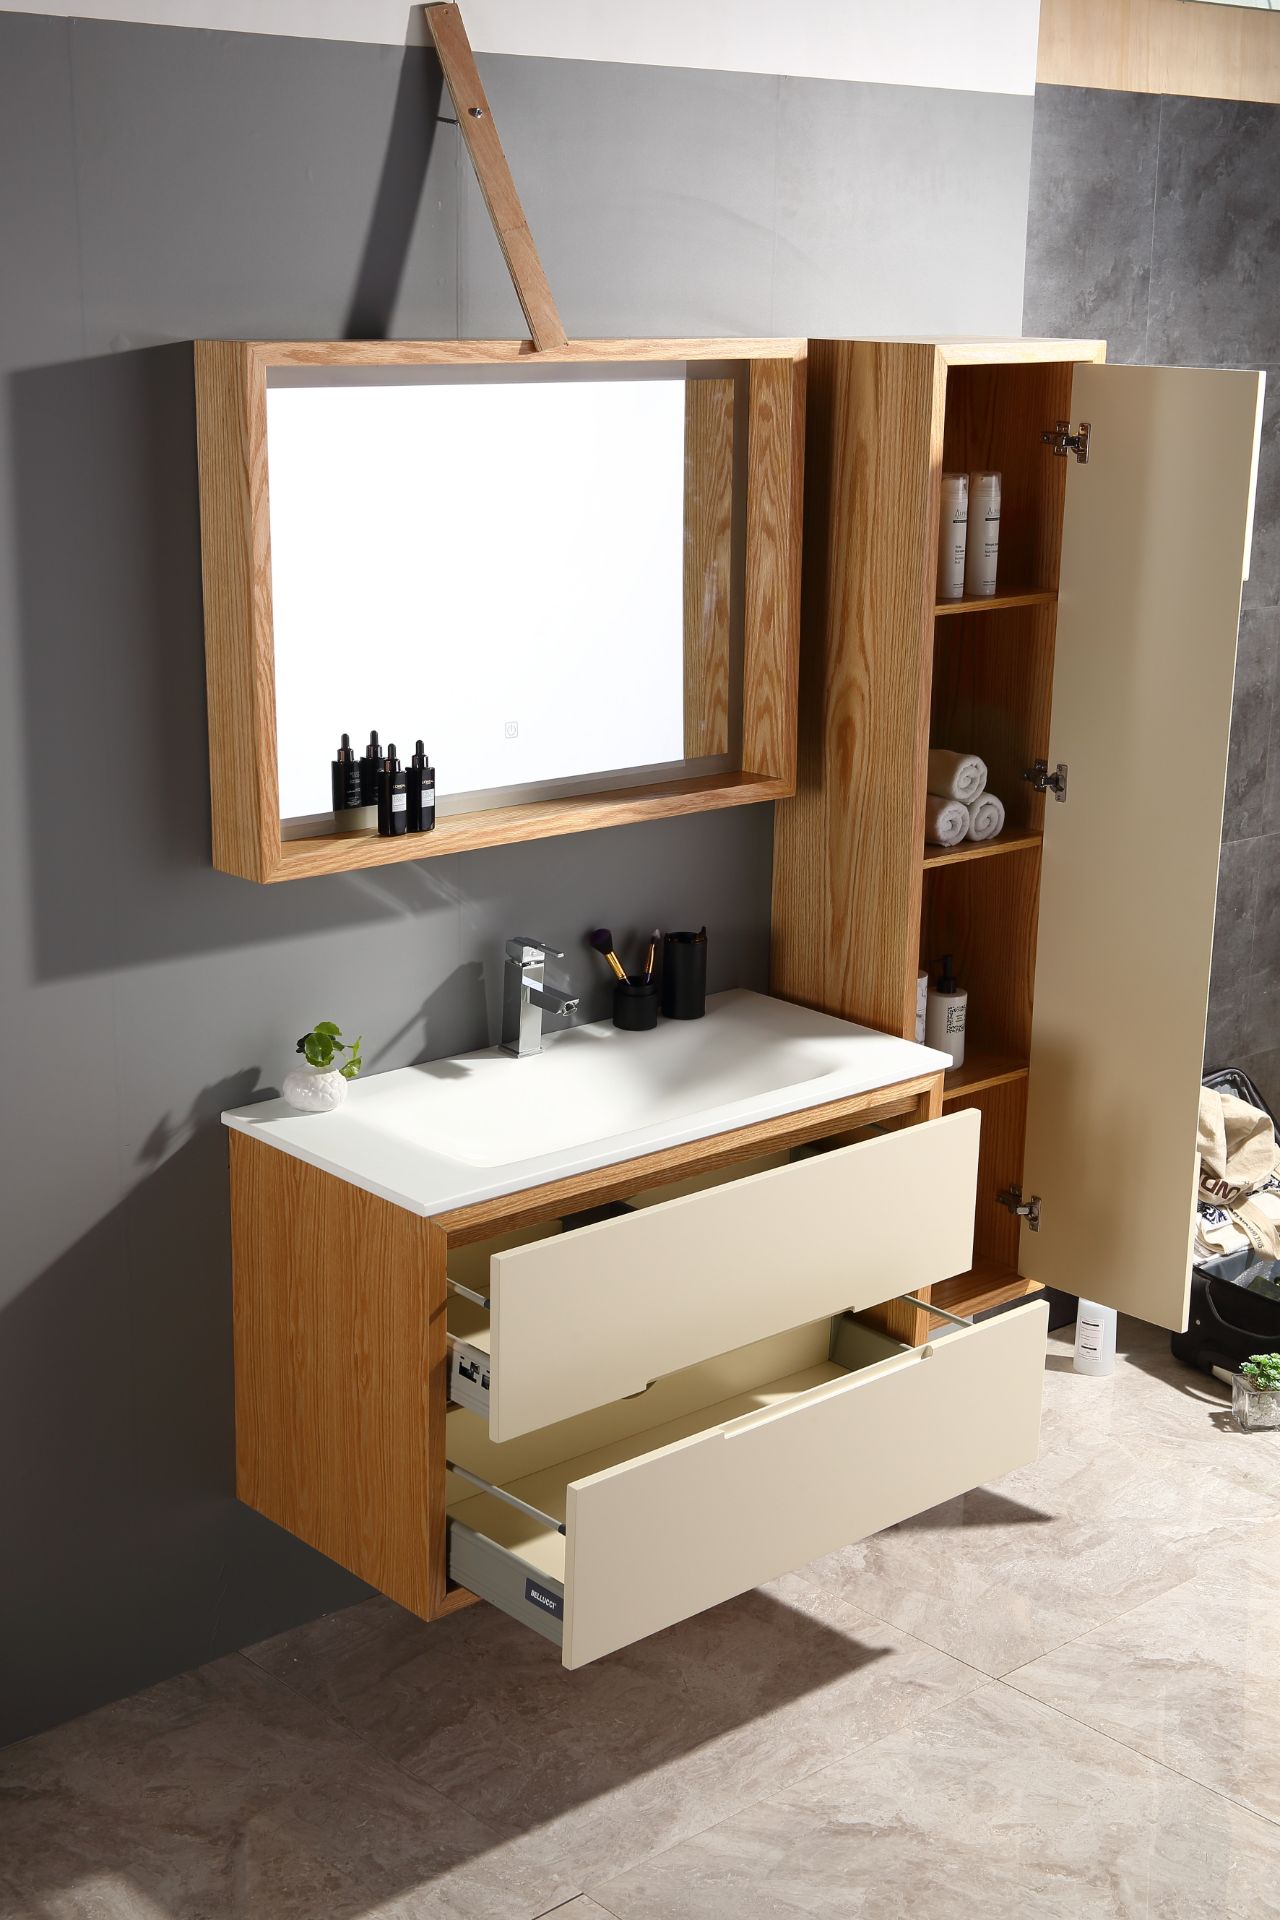 BRAND NEW Complete Vanity Unit Set in Beige with fixtures and fittings RRP £799.99 *NO VAT*